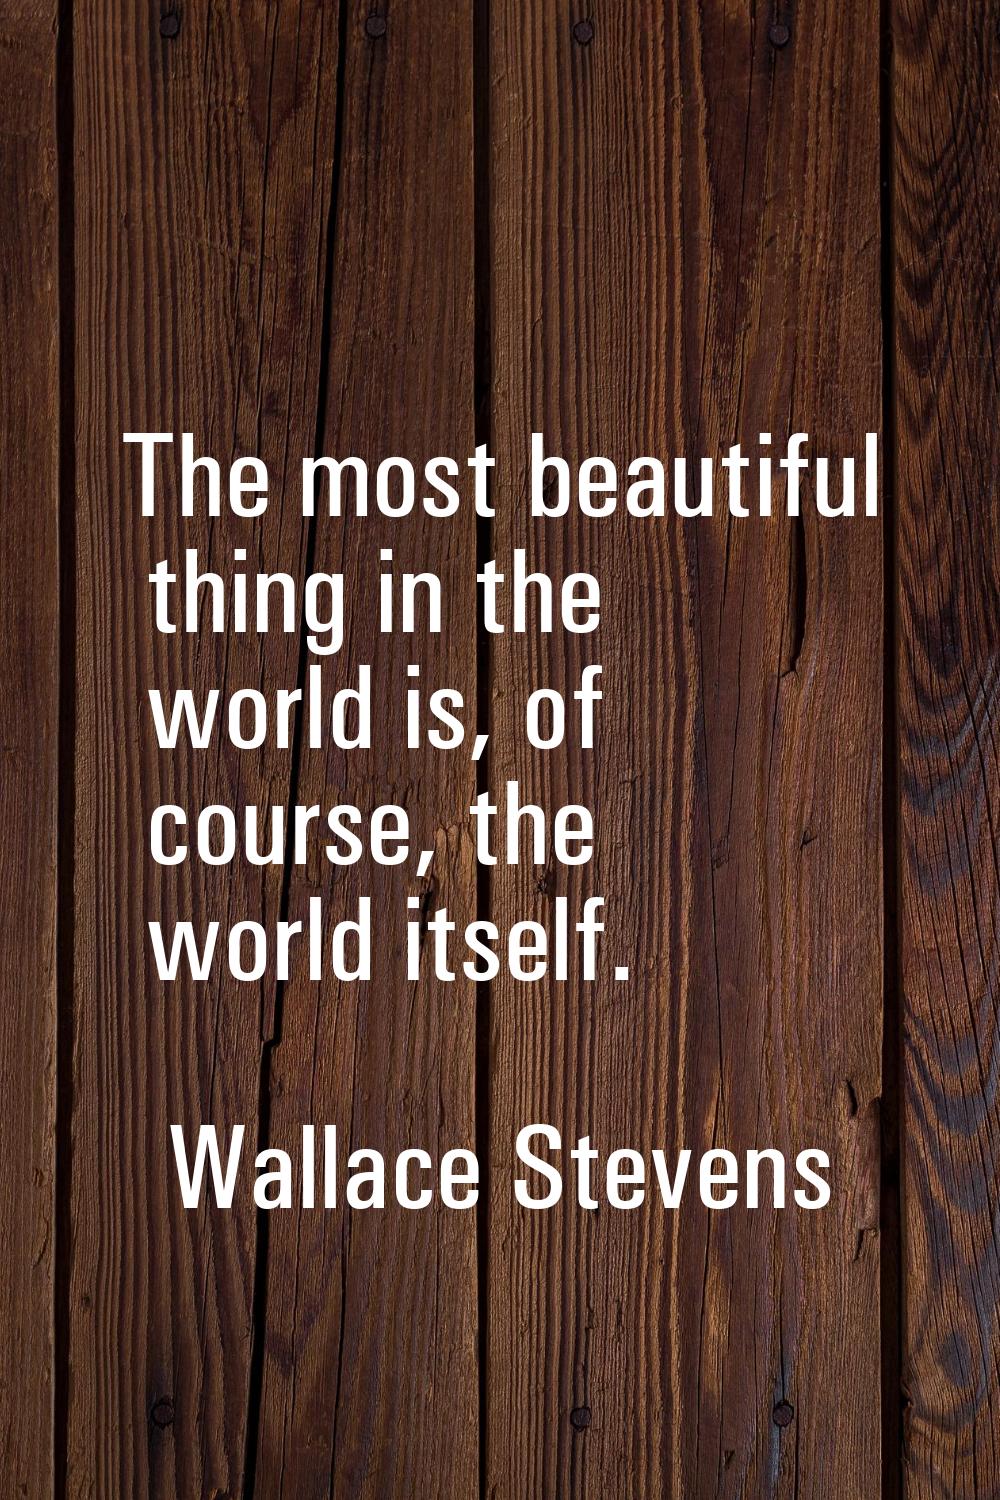 The most beautiful thing in the world is, of course, the world itself.